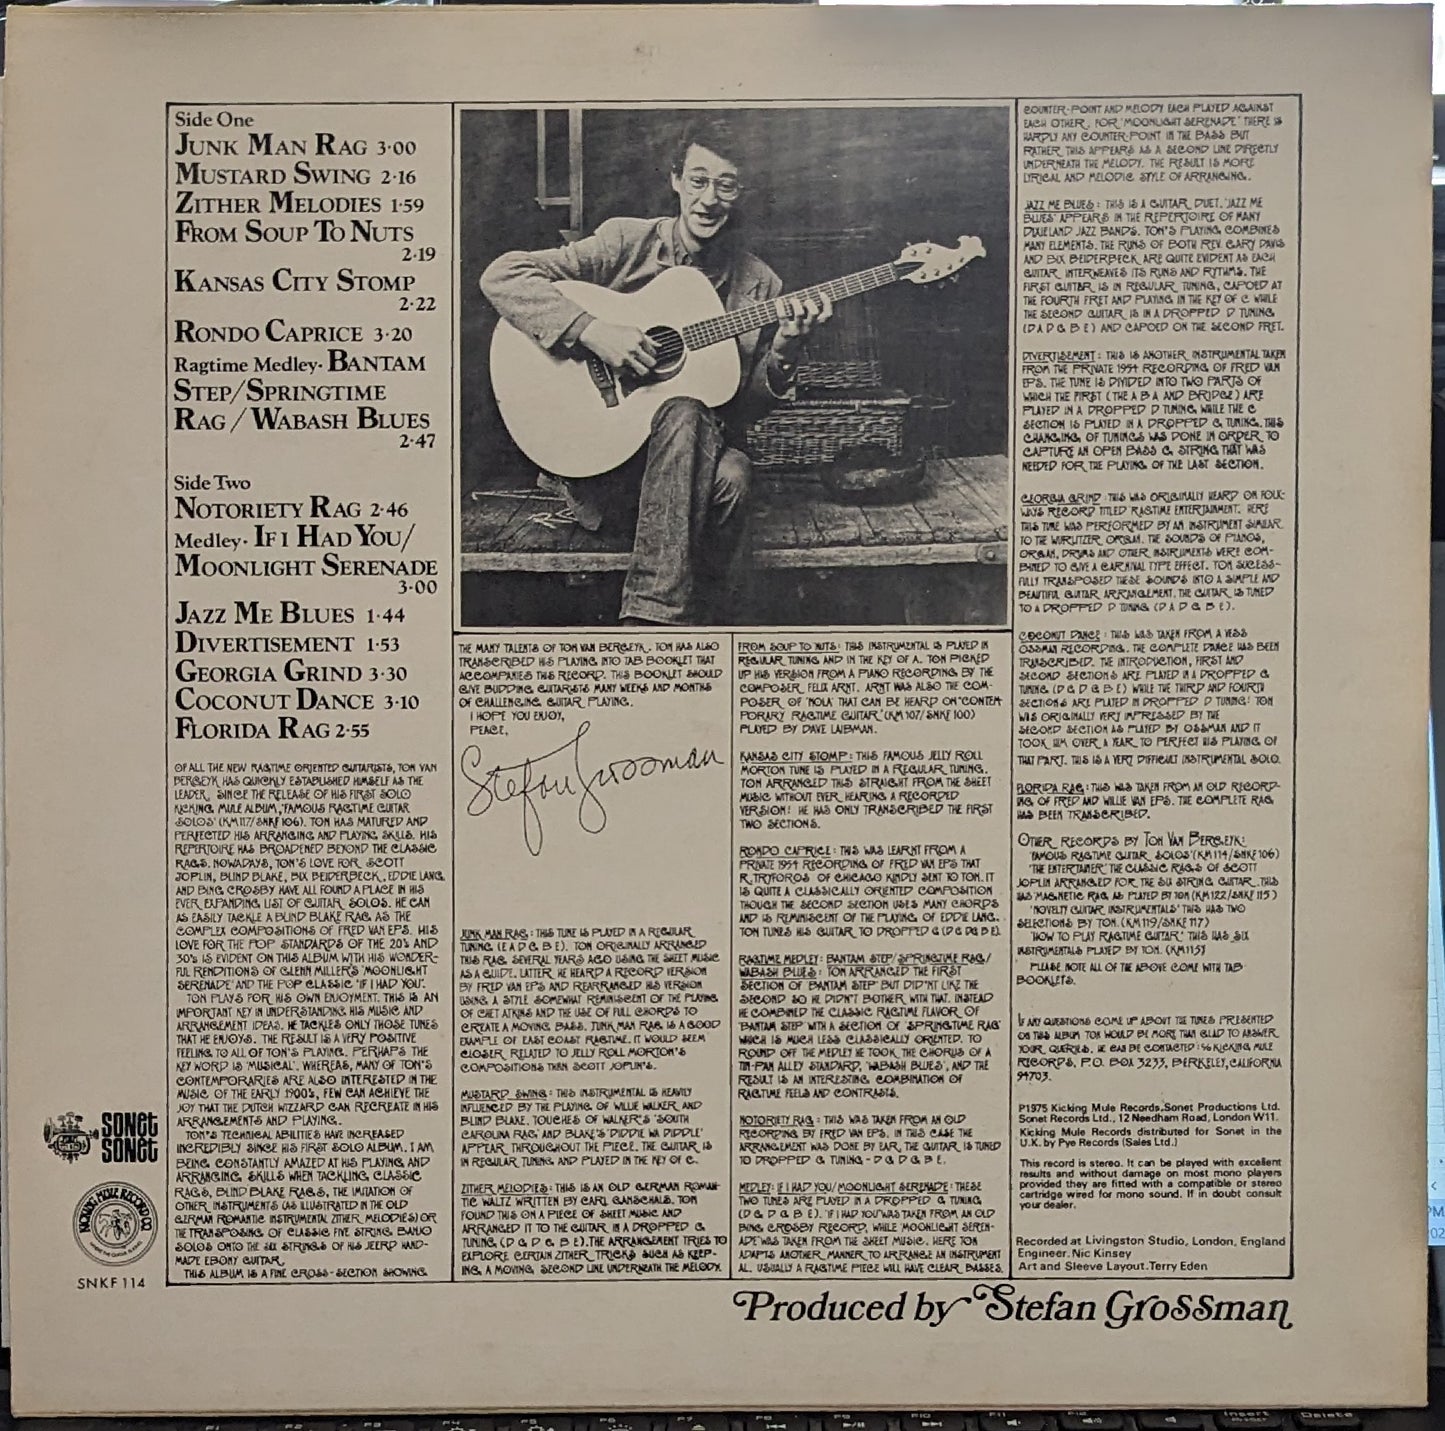 Ton Van Bergeijk Guitar Instrumentals To Tickle Your Fingers LP Near Mint (NM or M-) Near Mint (NM or M-)